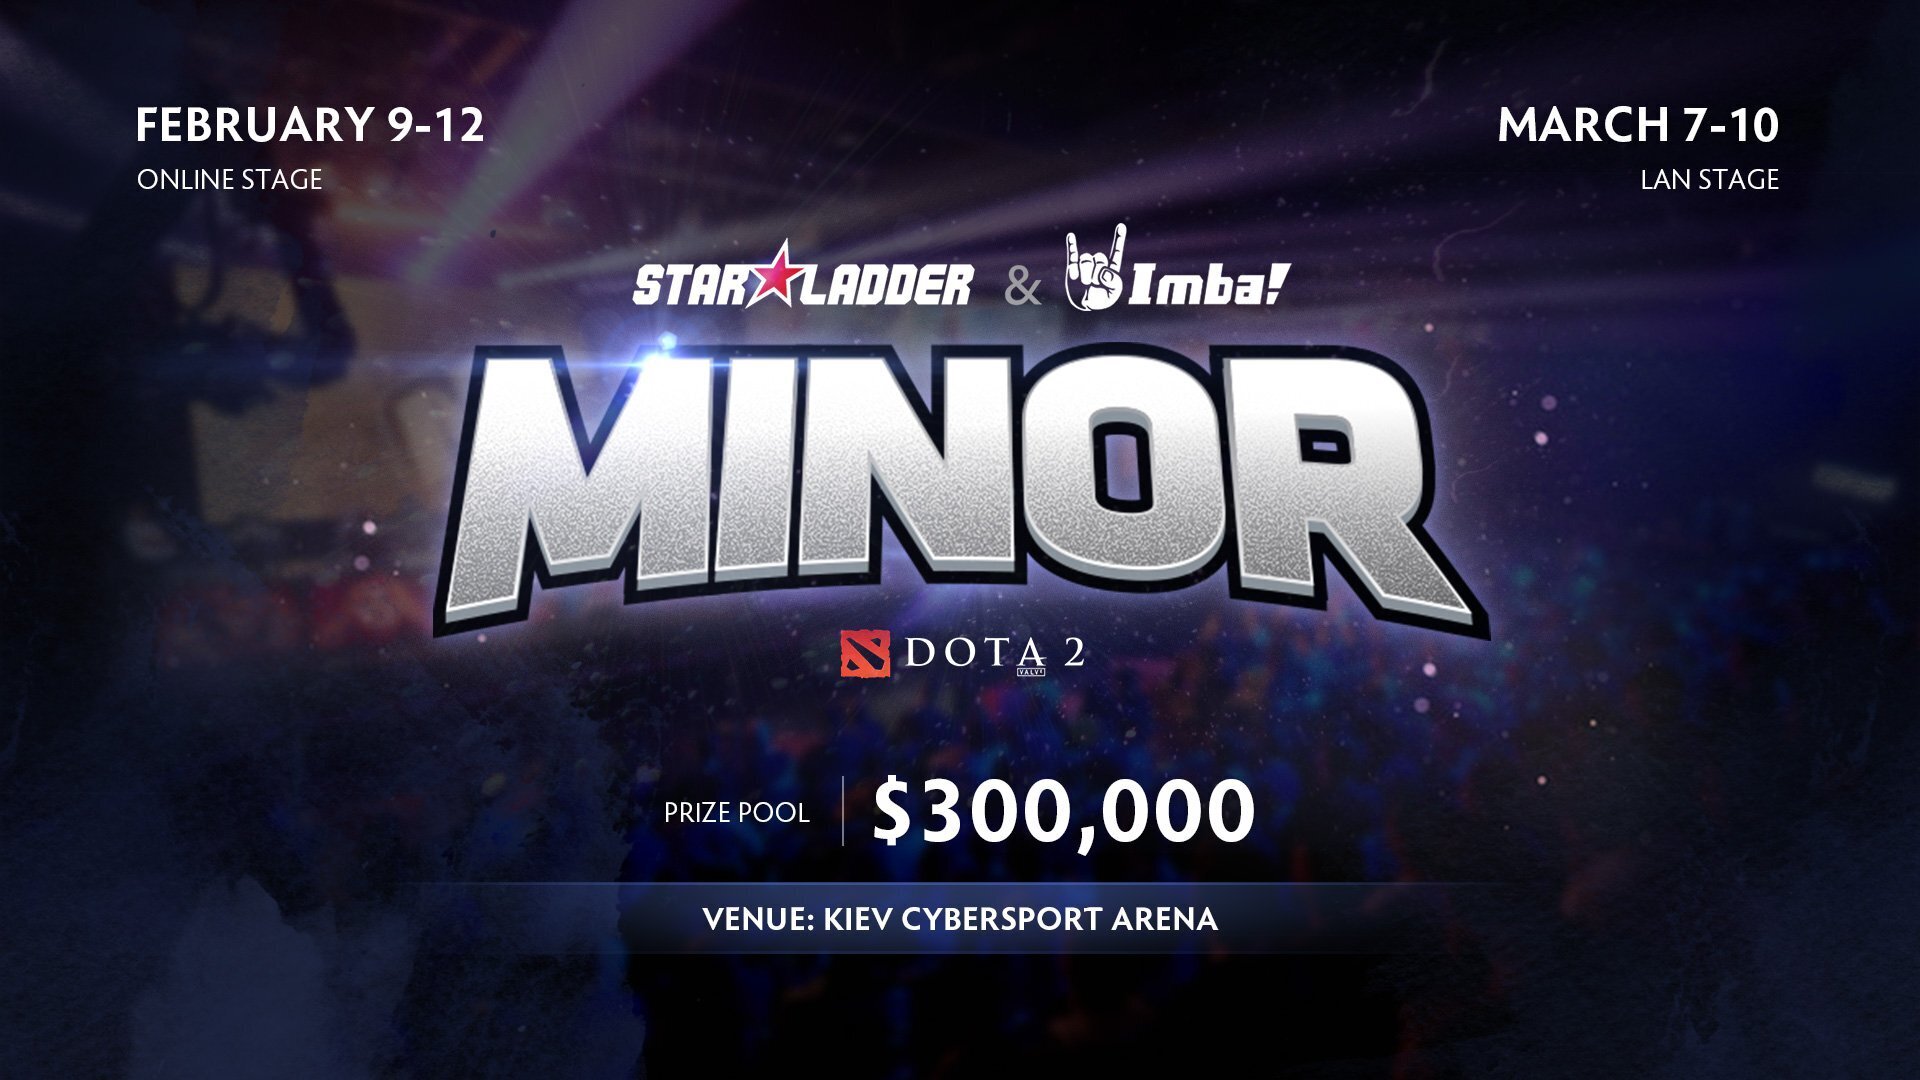 Reportedly, all of the Russian players who qualified to attend were denied entry into the country at the Ukraine border ahead of StarLadder ImbaTV.